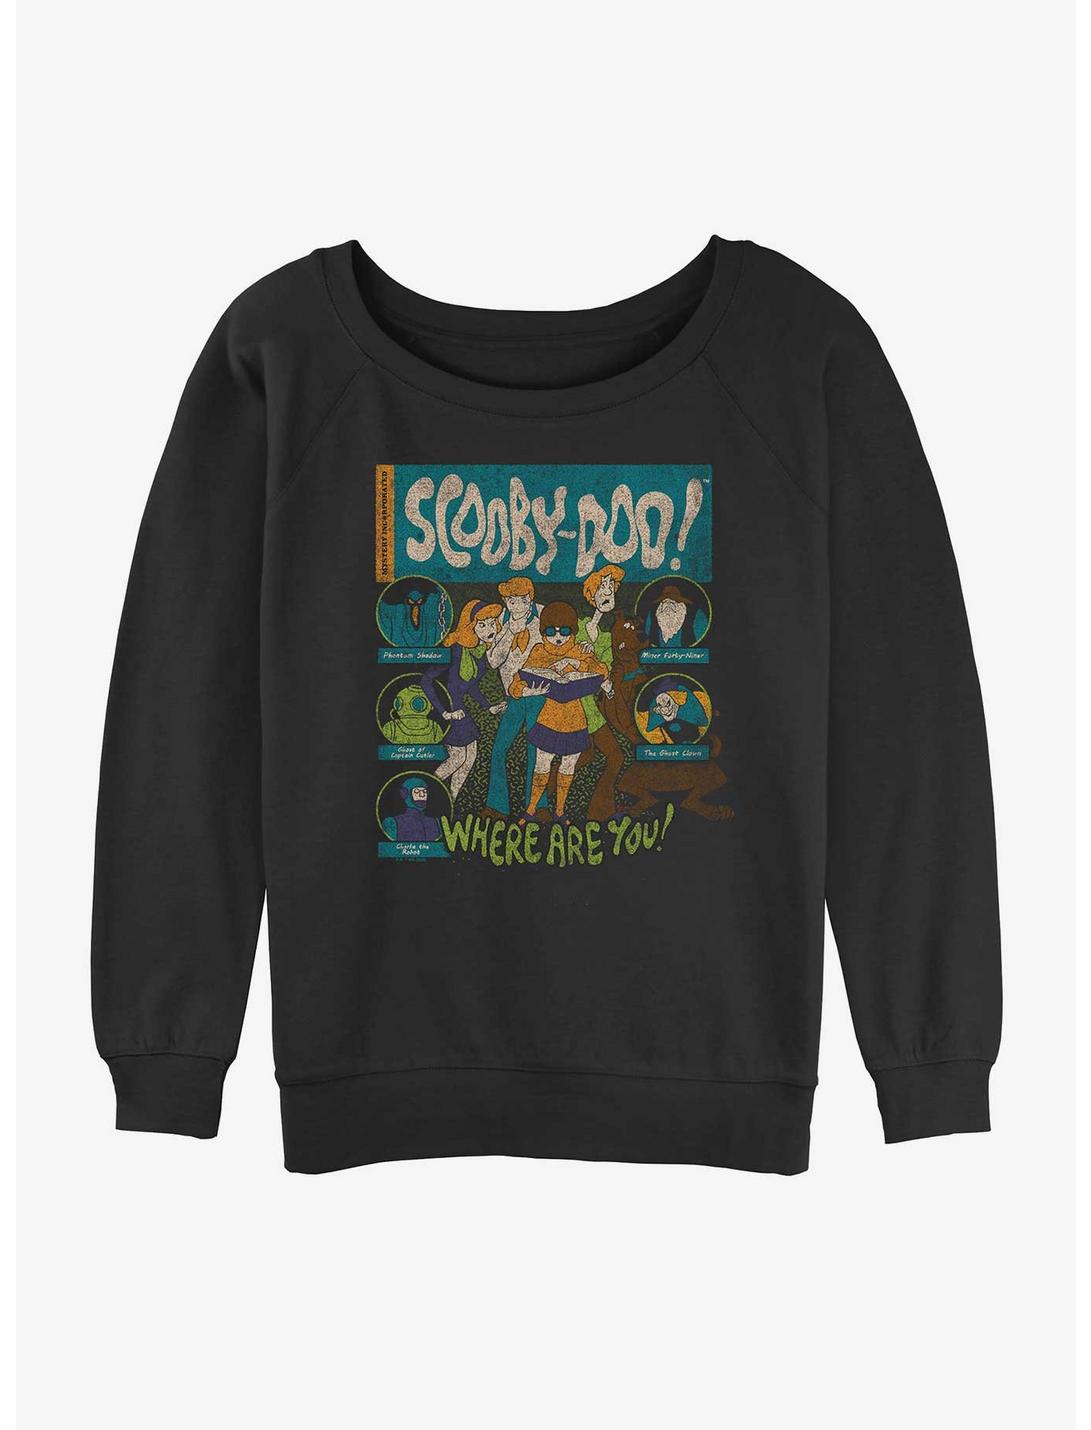 Scooby-Doo Mystery Poster Womens Slouchy Sweatshirt, BLACK, hi-res